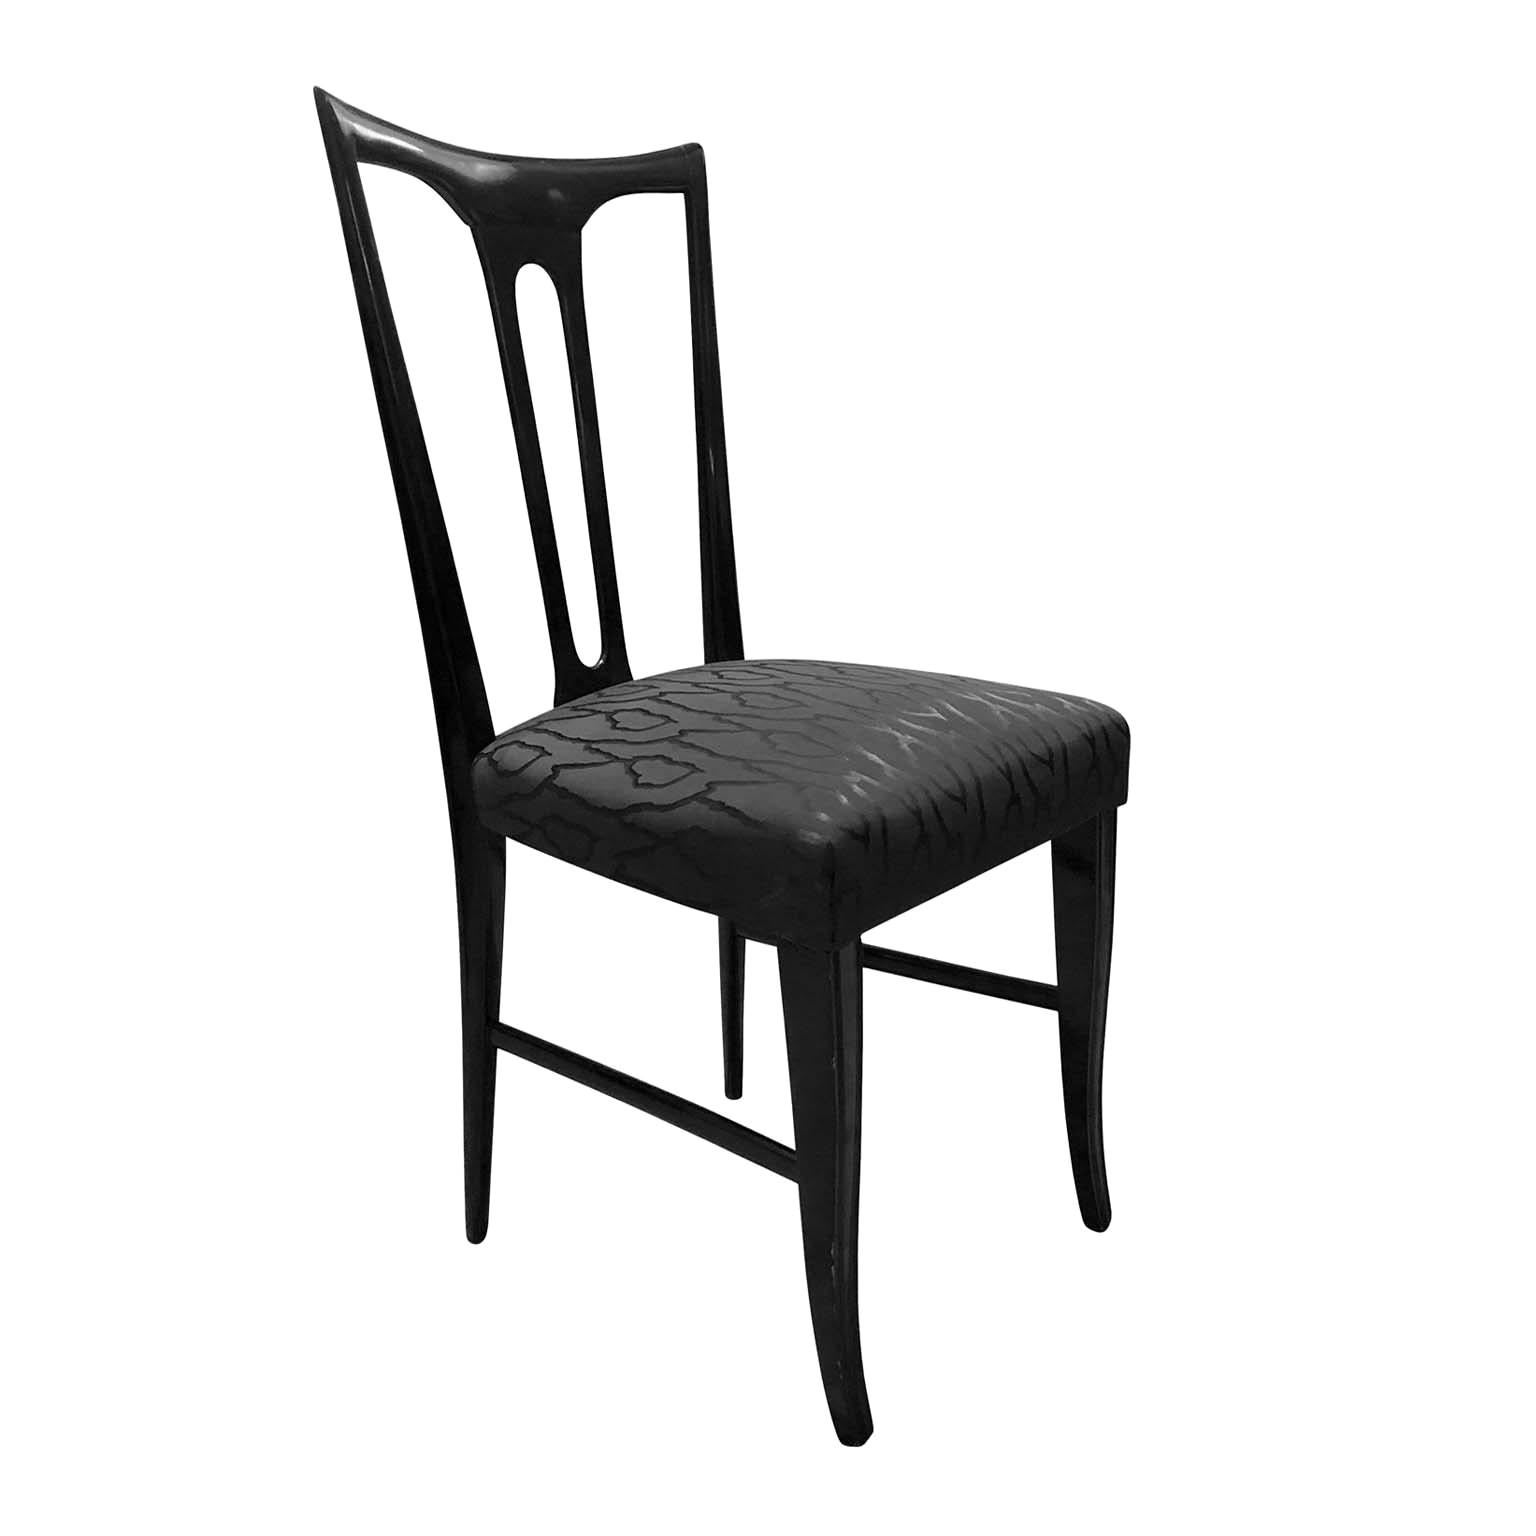 Midcentury Italian Ebonized Occasional Chair in Black Patterned Satin For Sale